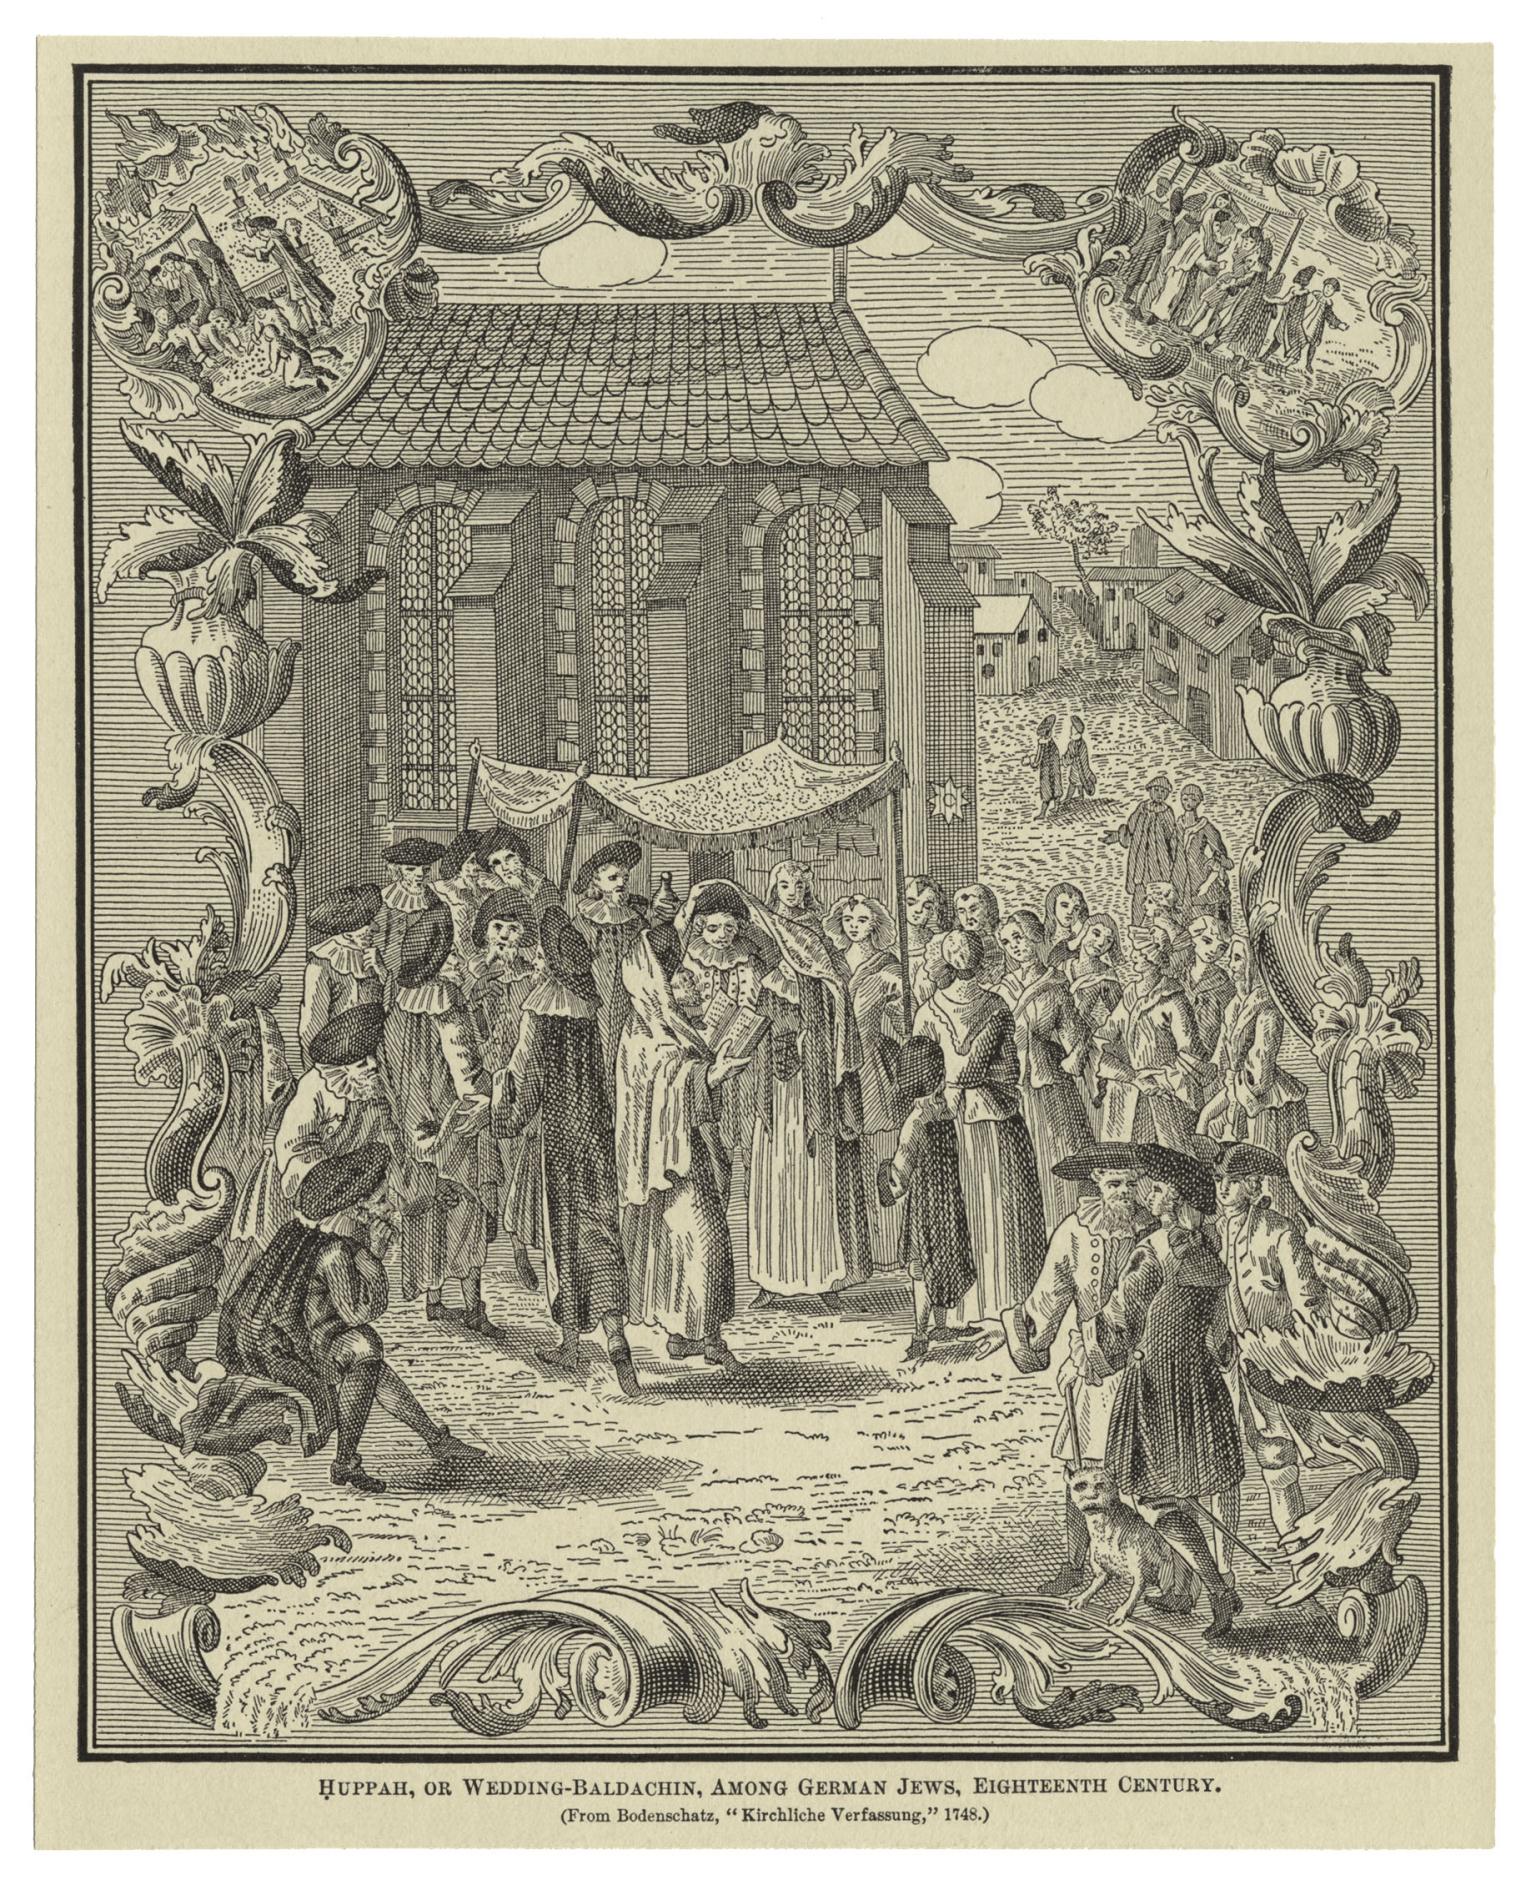 Etching of ceremony under marriage canopy outside a building, surrounded by people and framed by decorative motif. 